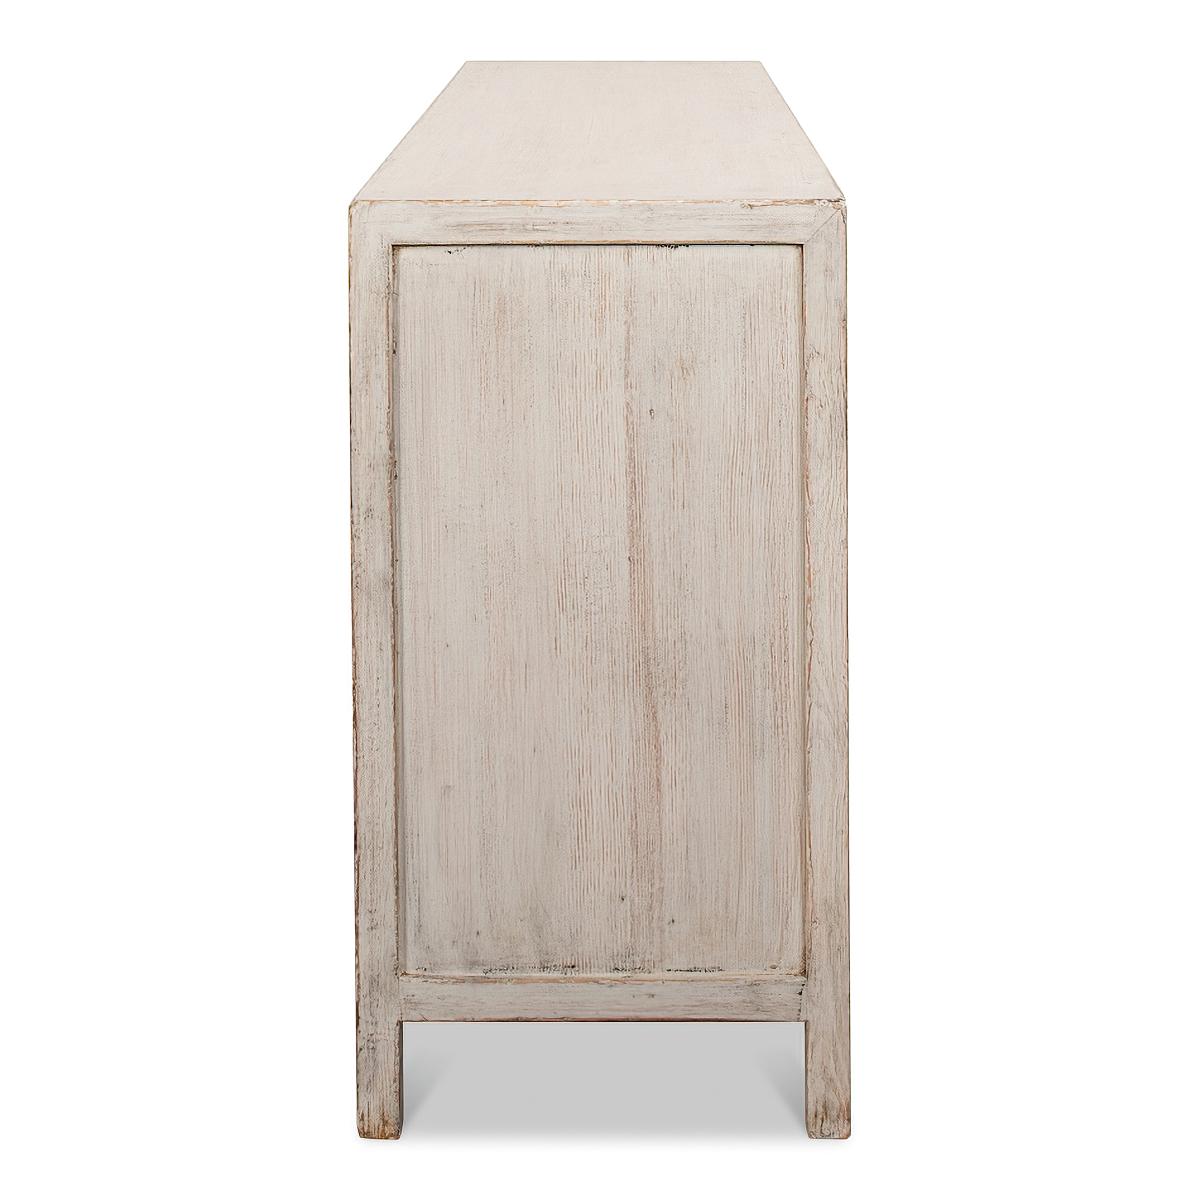 Contemporary Rustic Painted Dresser